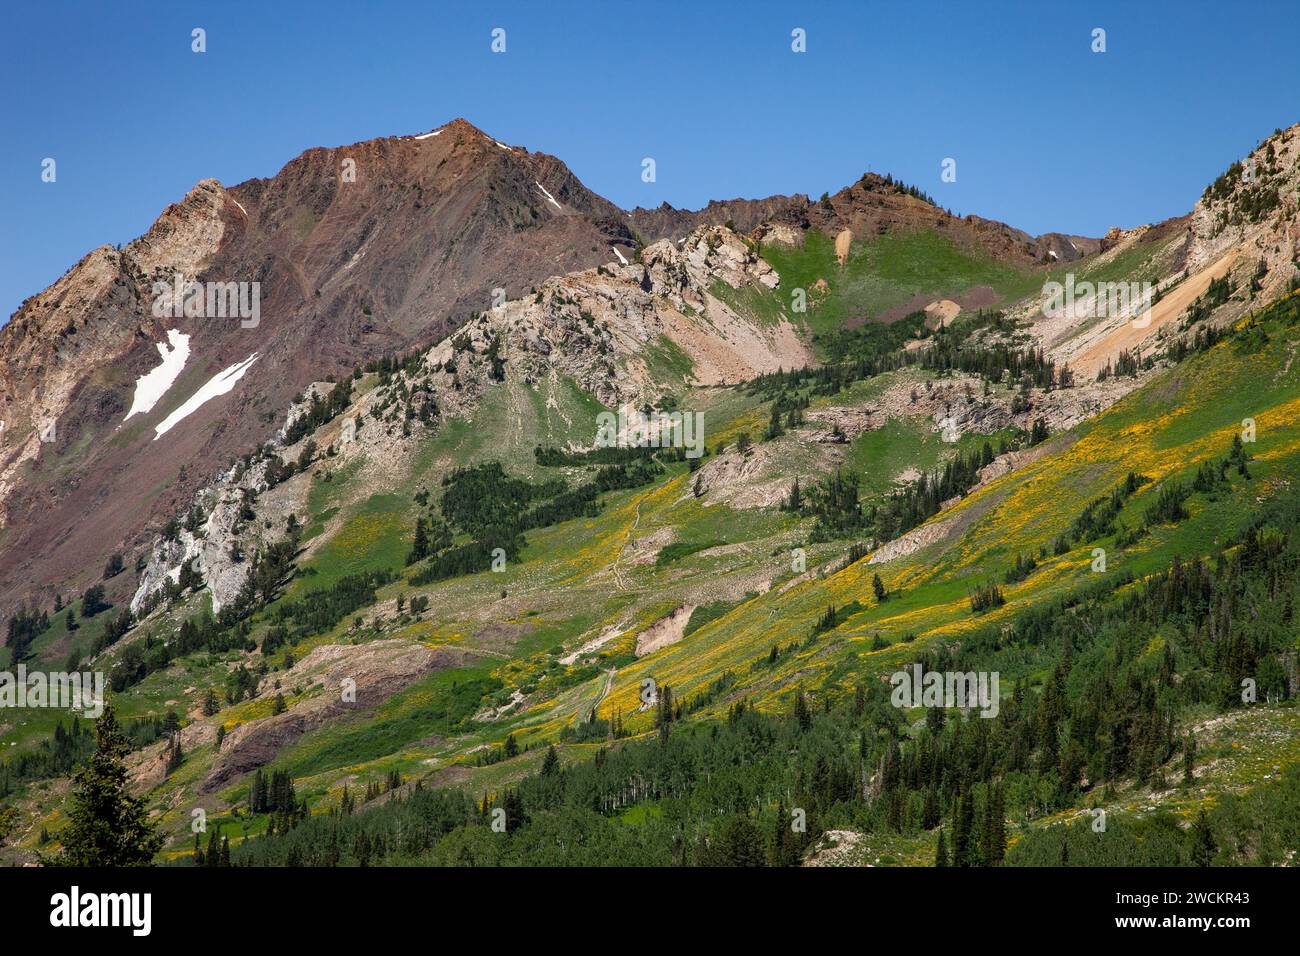 Summer wildflower bloom in Albion Basin in Little Cottonwood Canyon by Salt Lake City, Utah.  Mount Superior is behind. Stock Photo